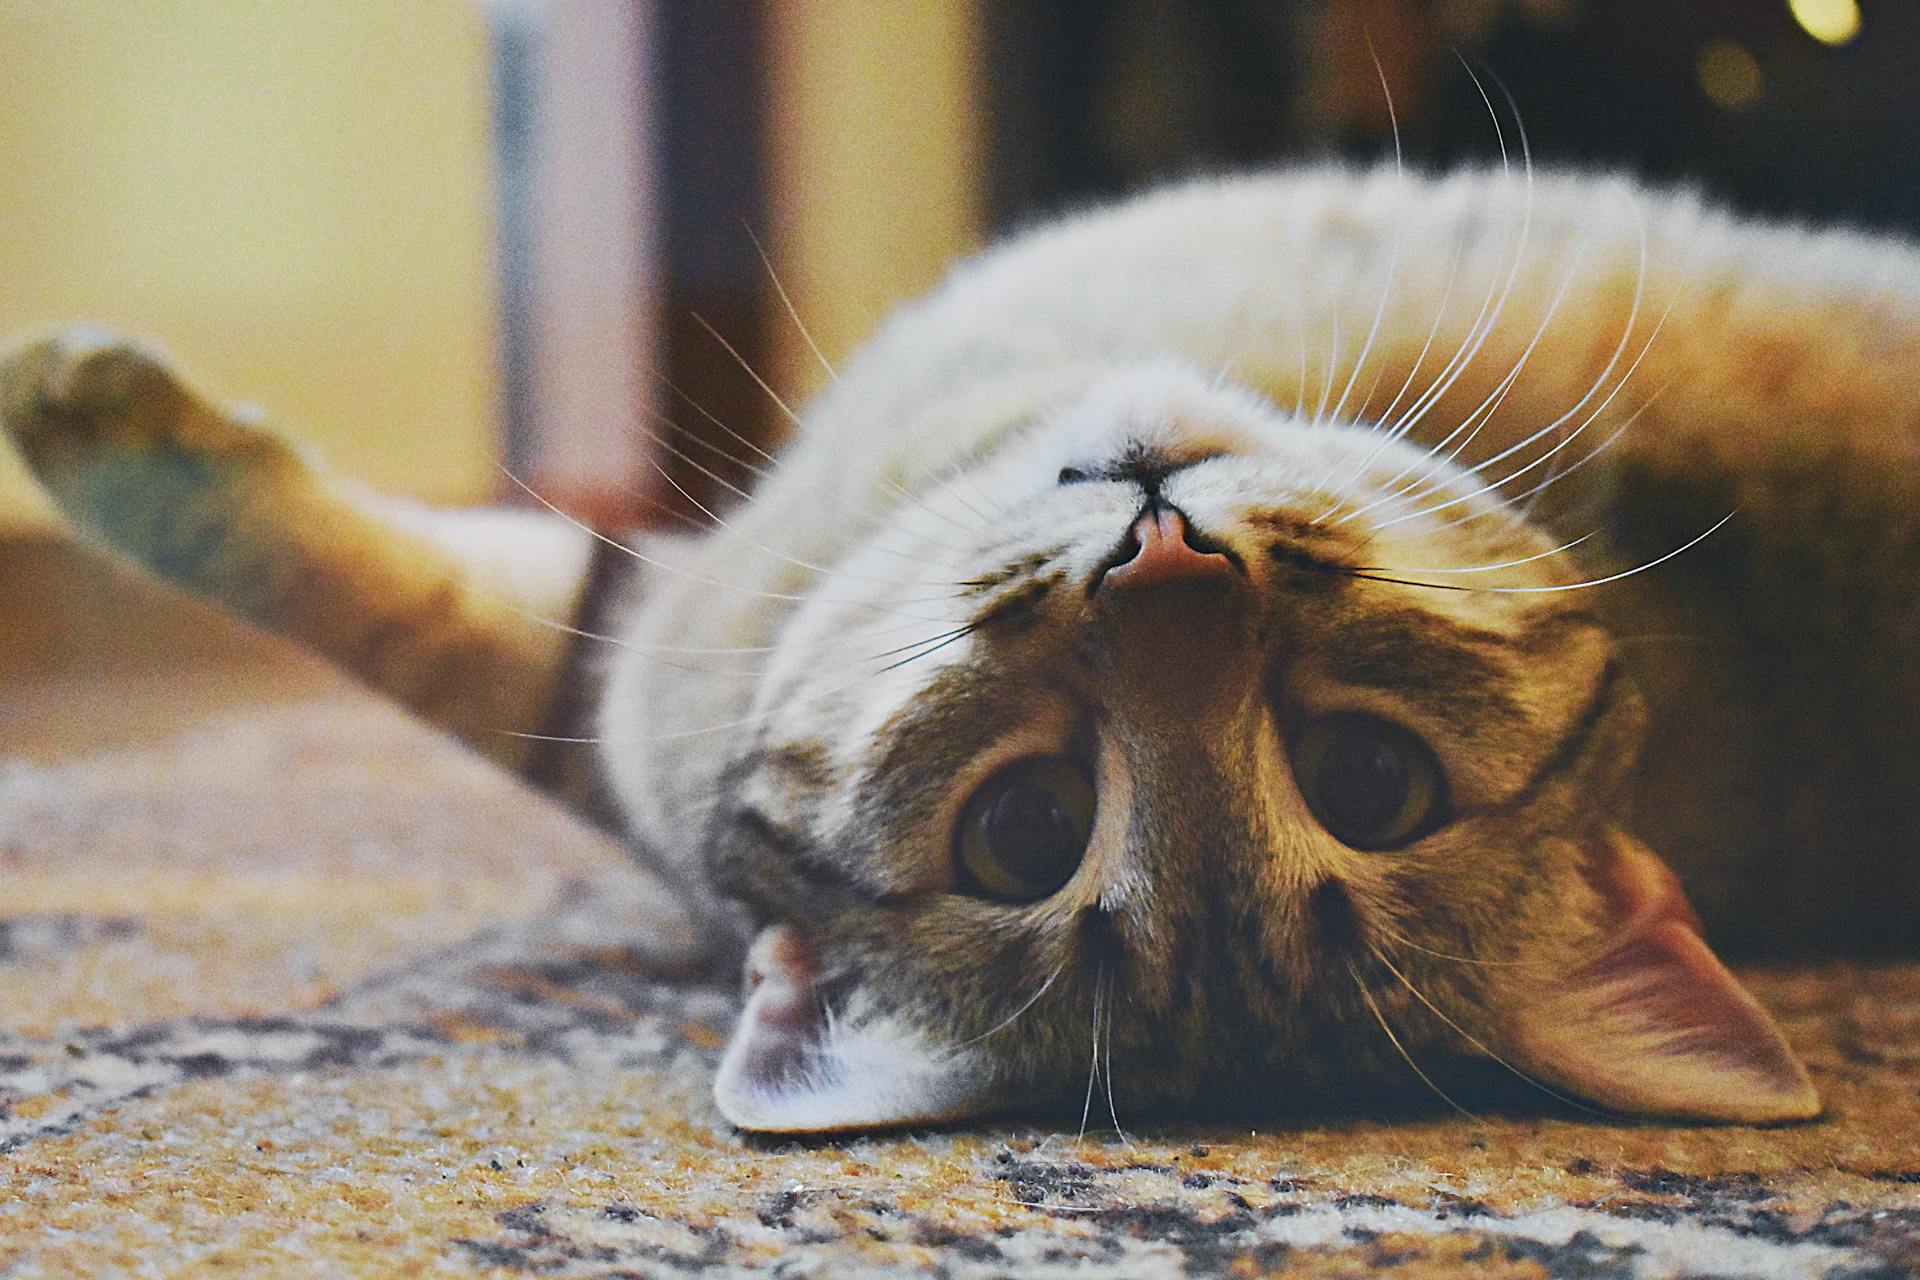 Cat laying on his back | Source: Pexels